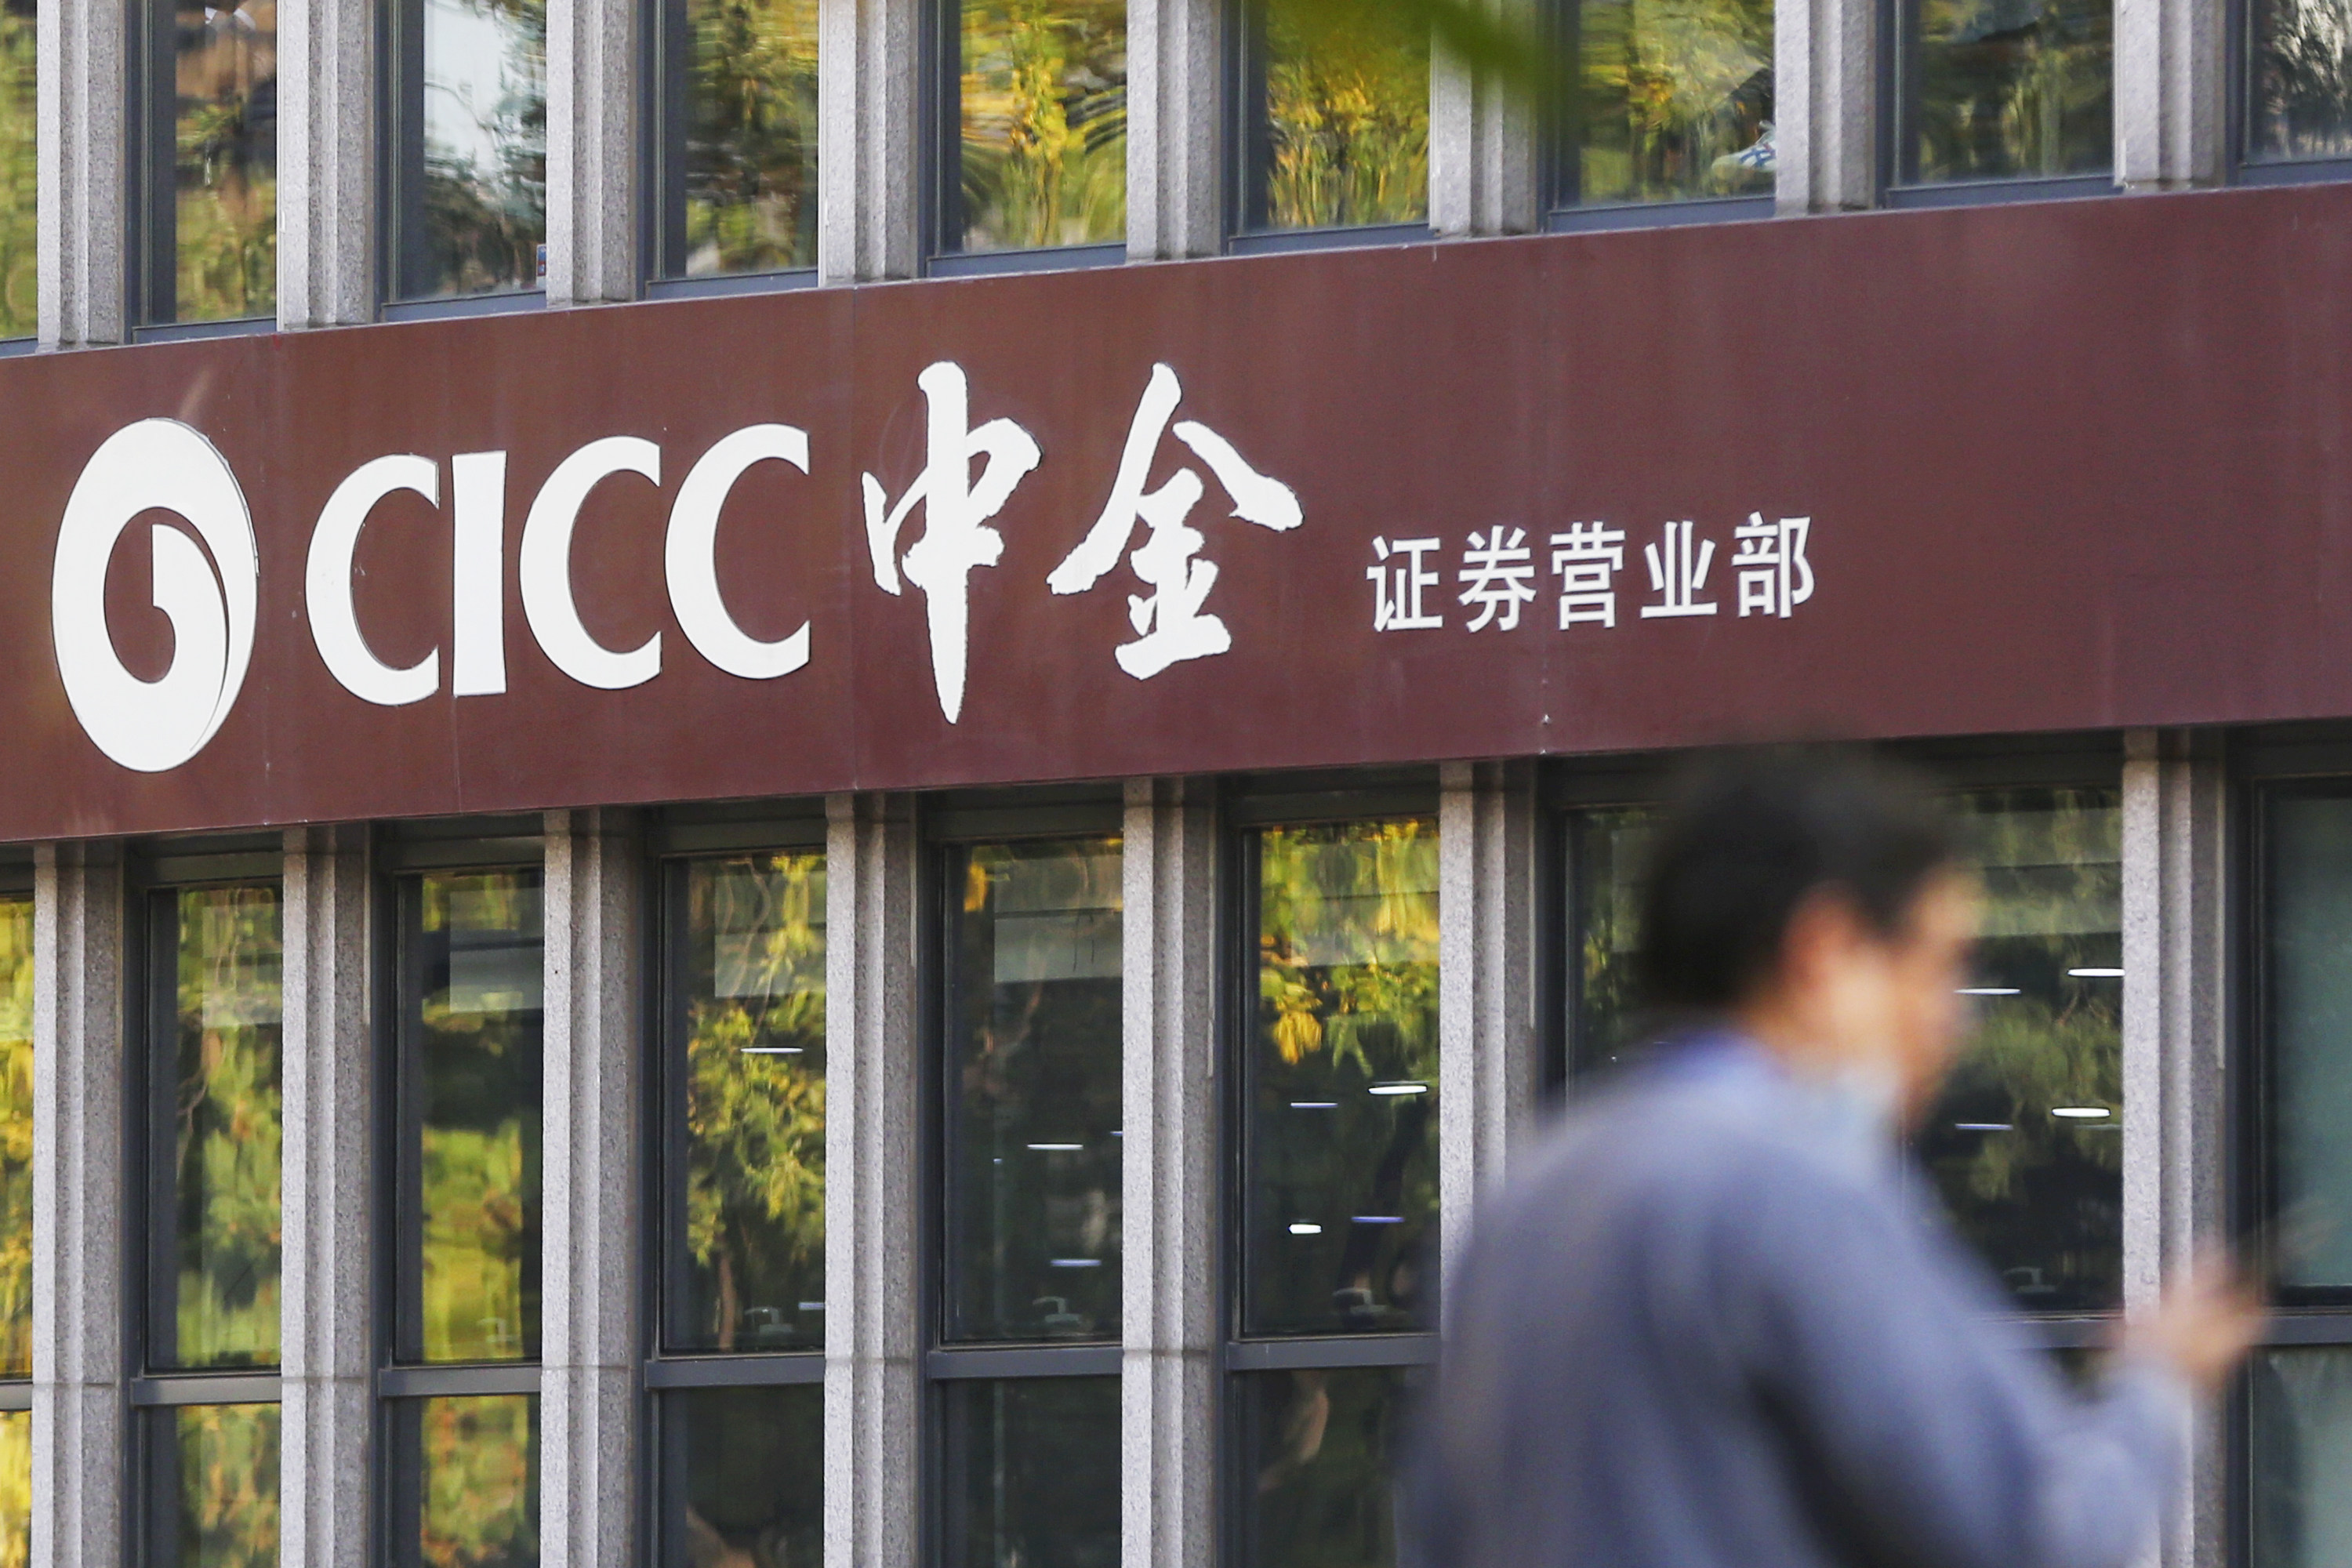 CICC has communicated to bankers internally that some individuals could lose their managing director titles and be relegated to lower ranks under a new performance-rating system. Photo: VCG via Getty Images